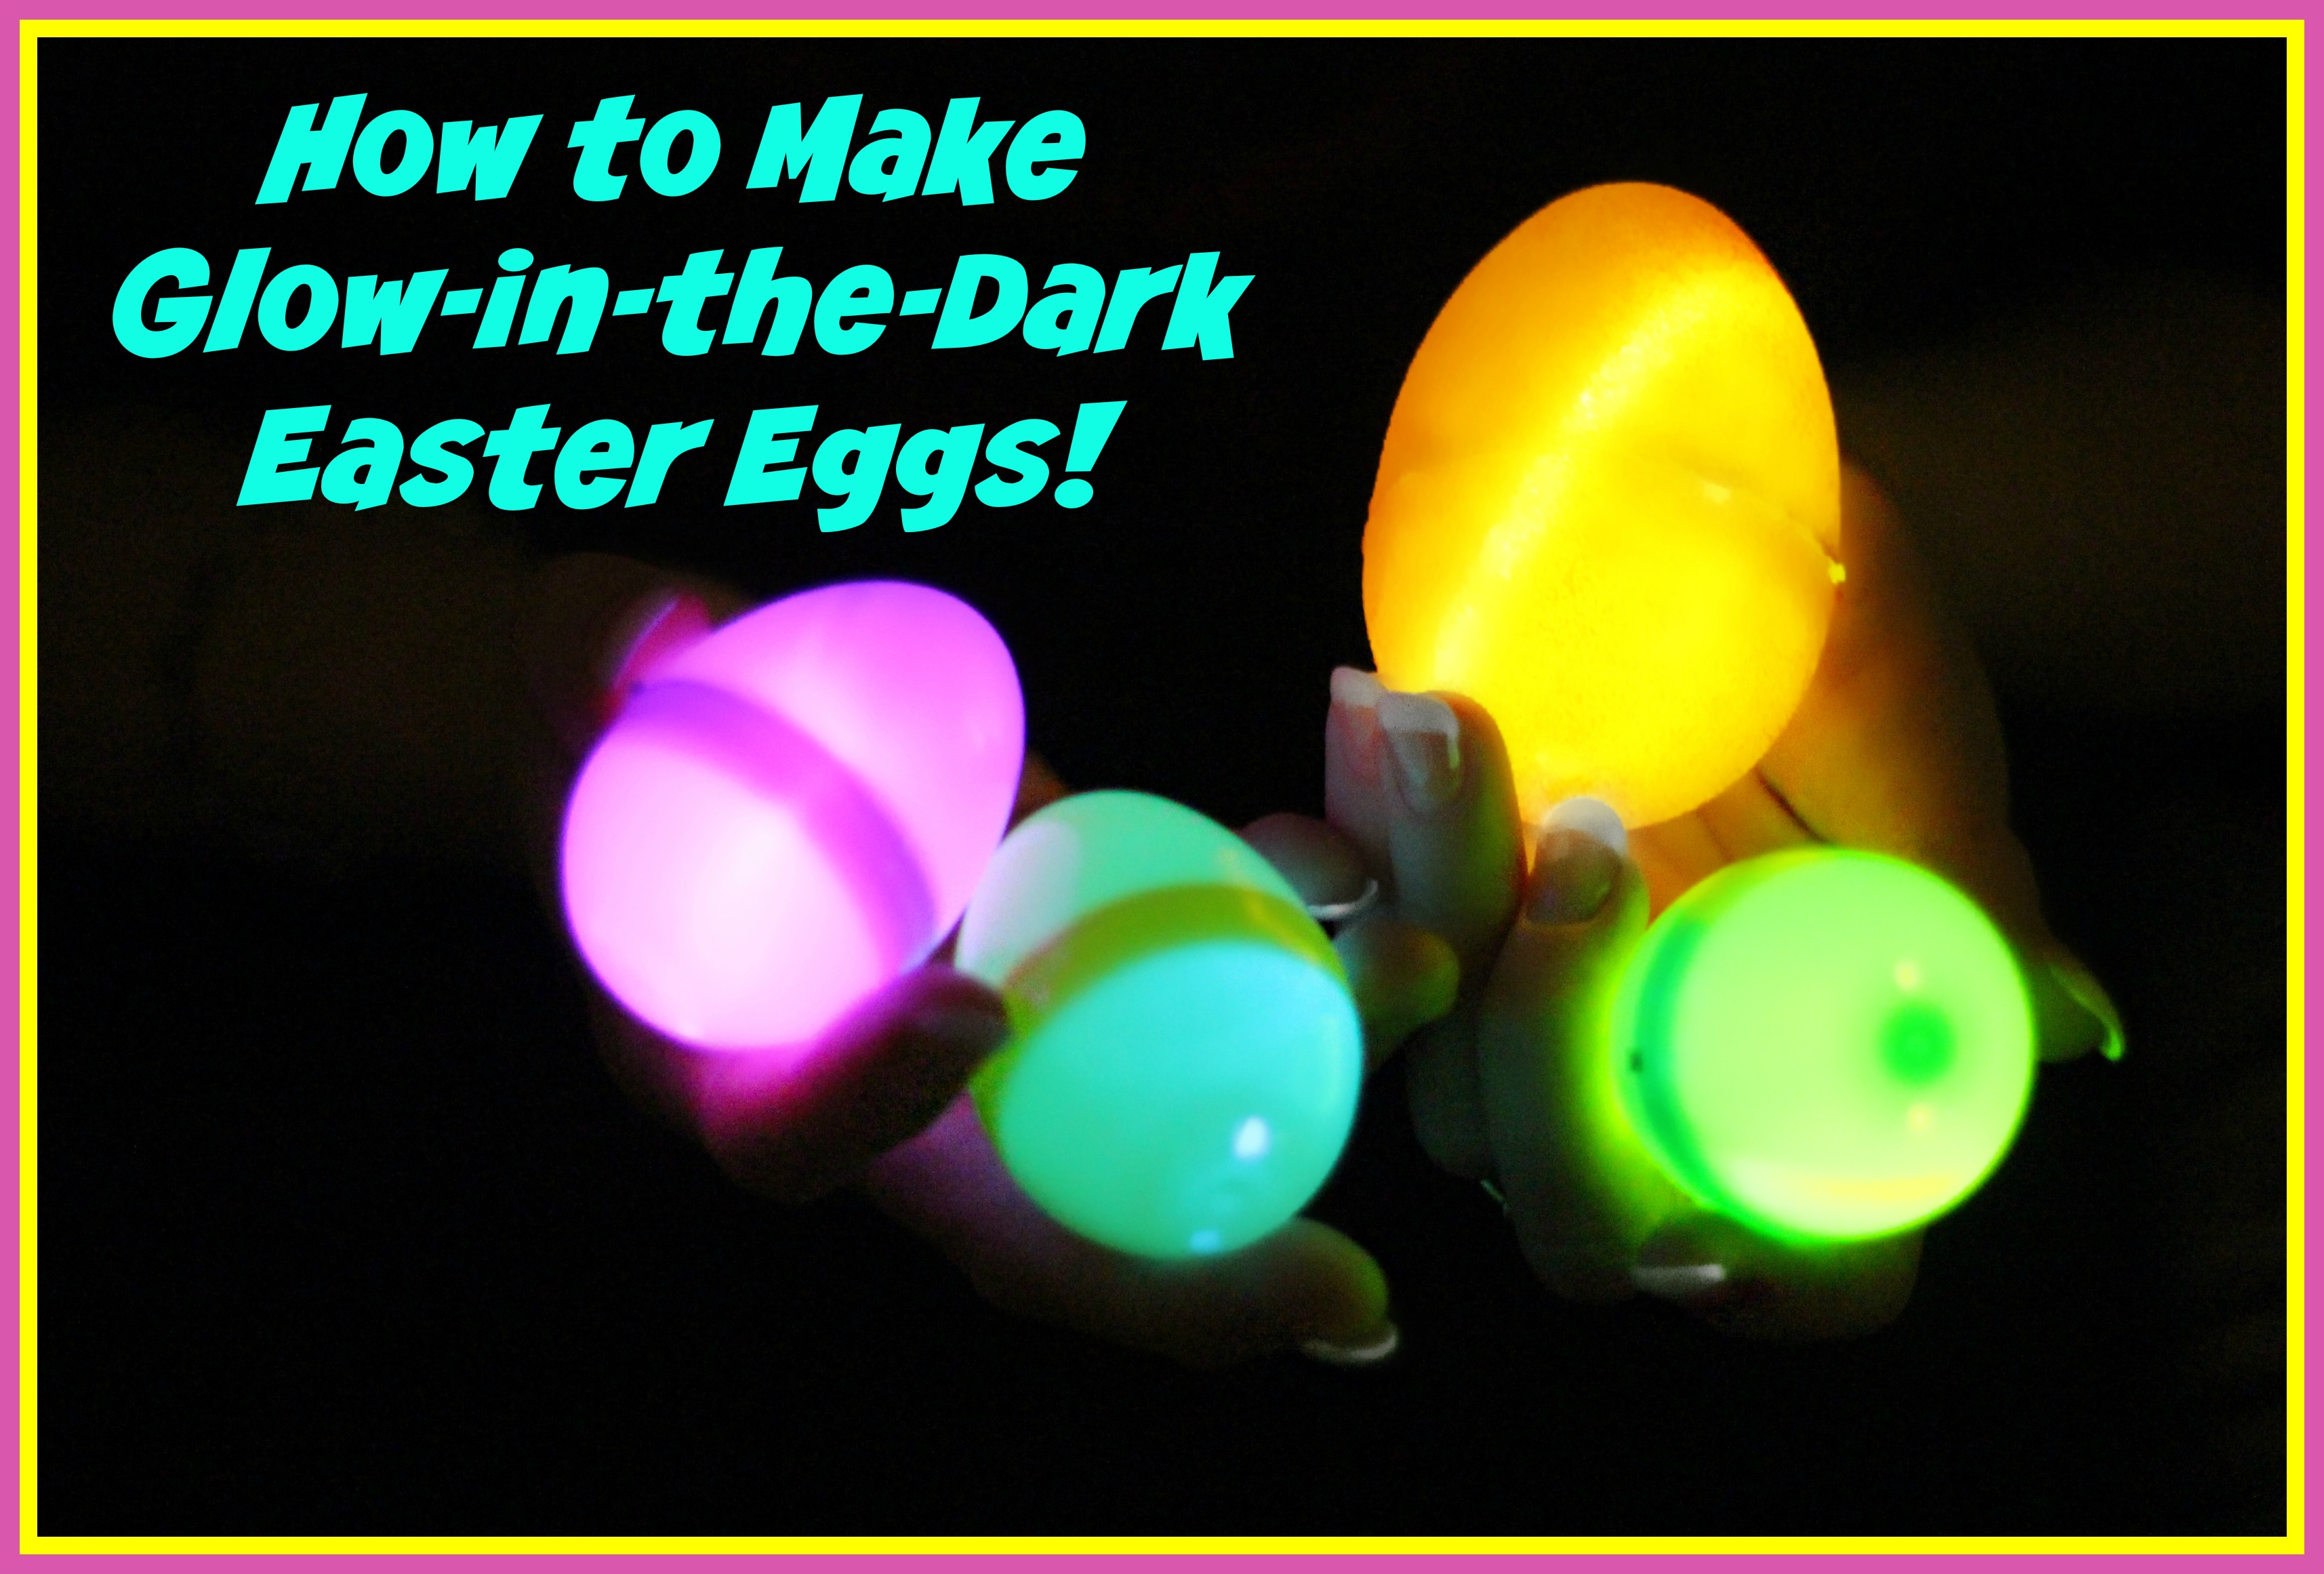 #Easter #DIY #crafts #EasterEggs #OurBigFamily